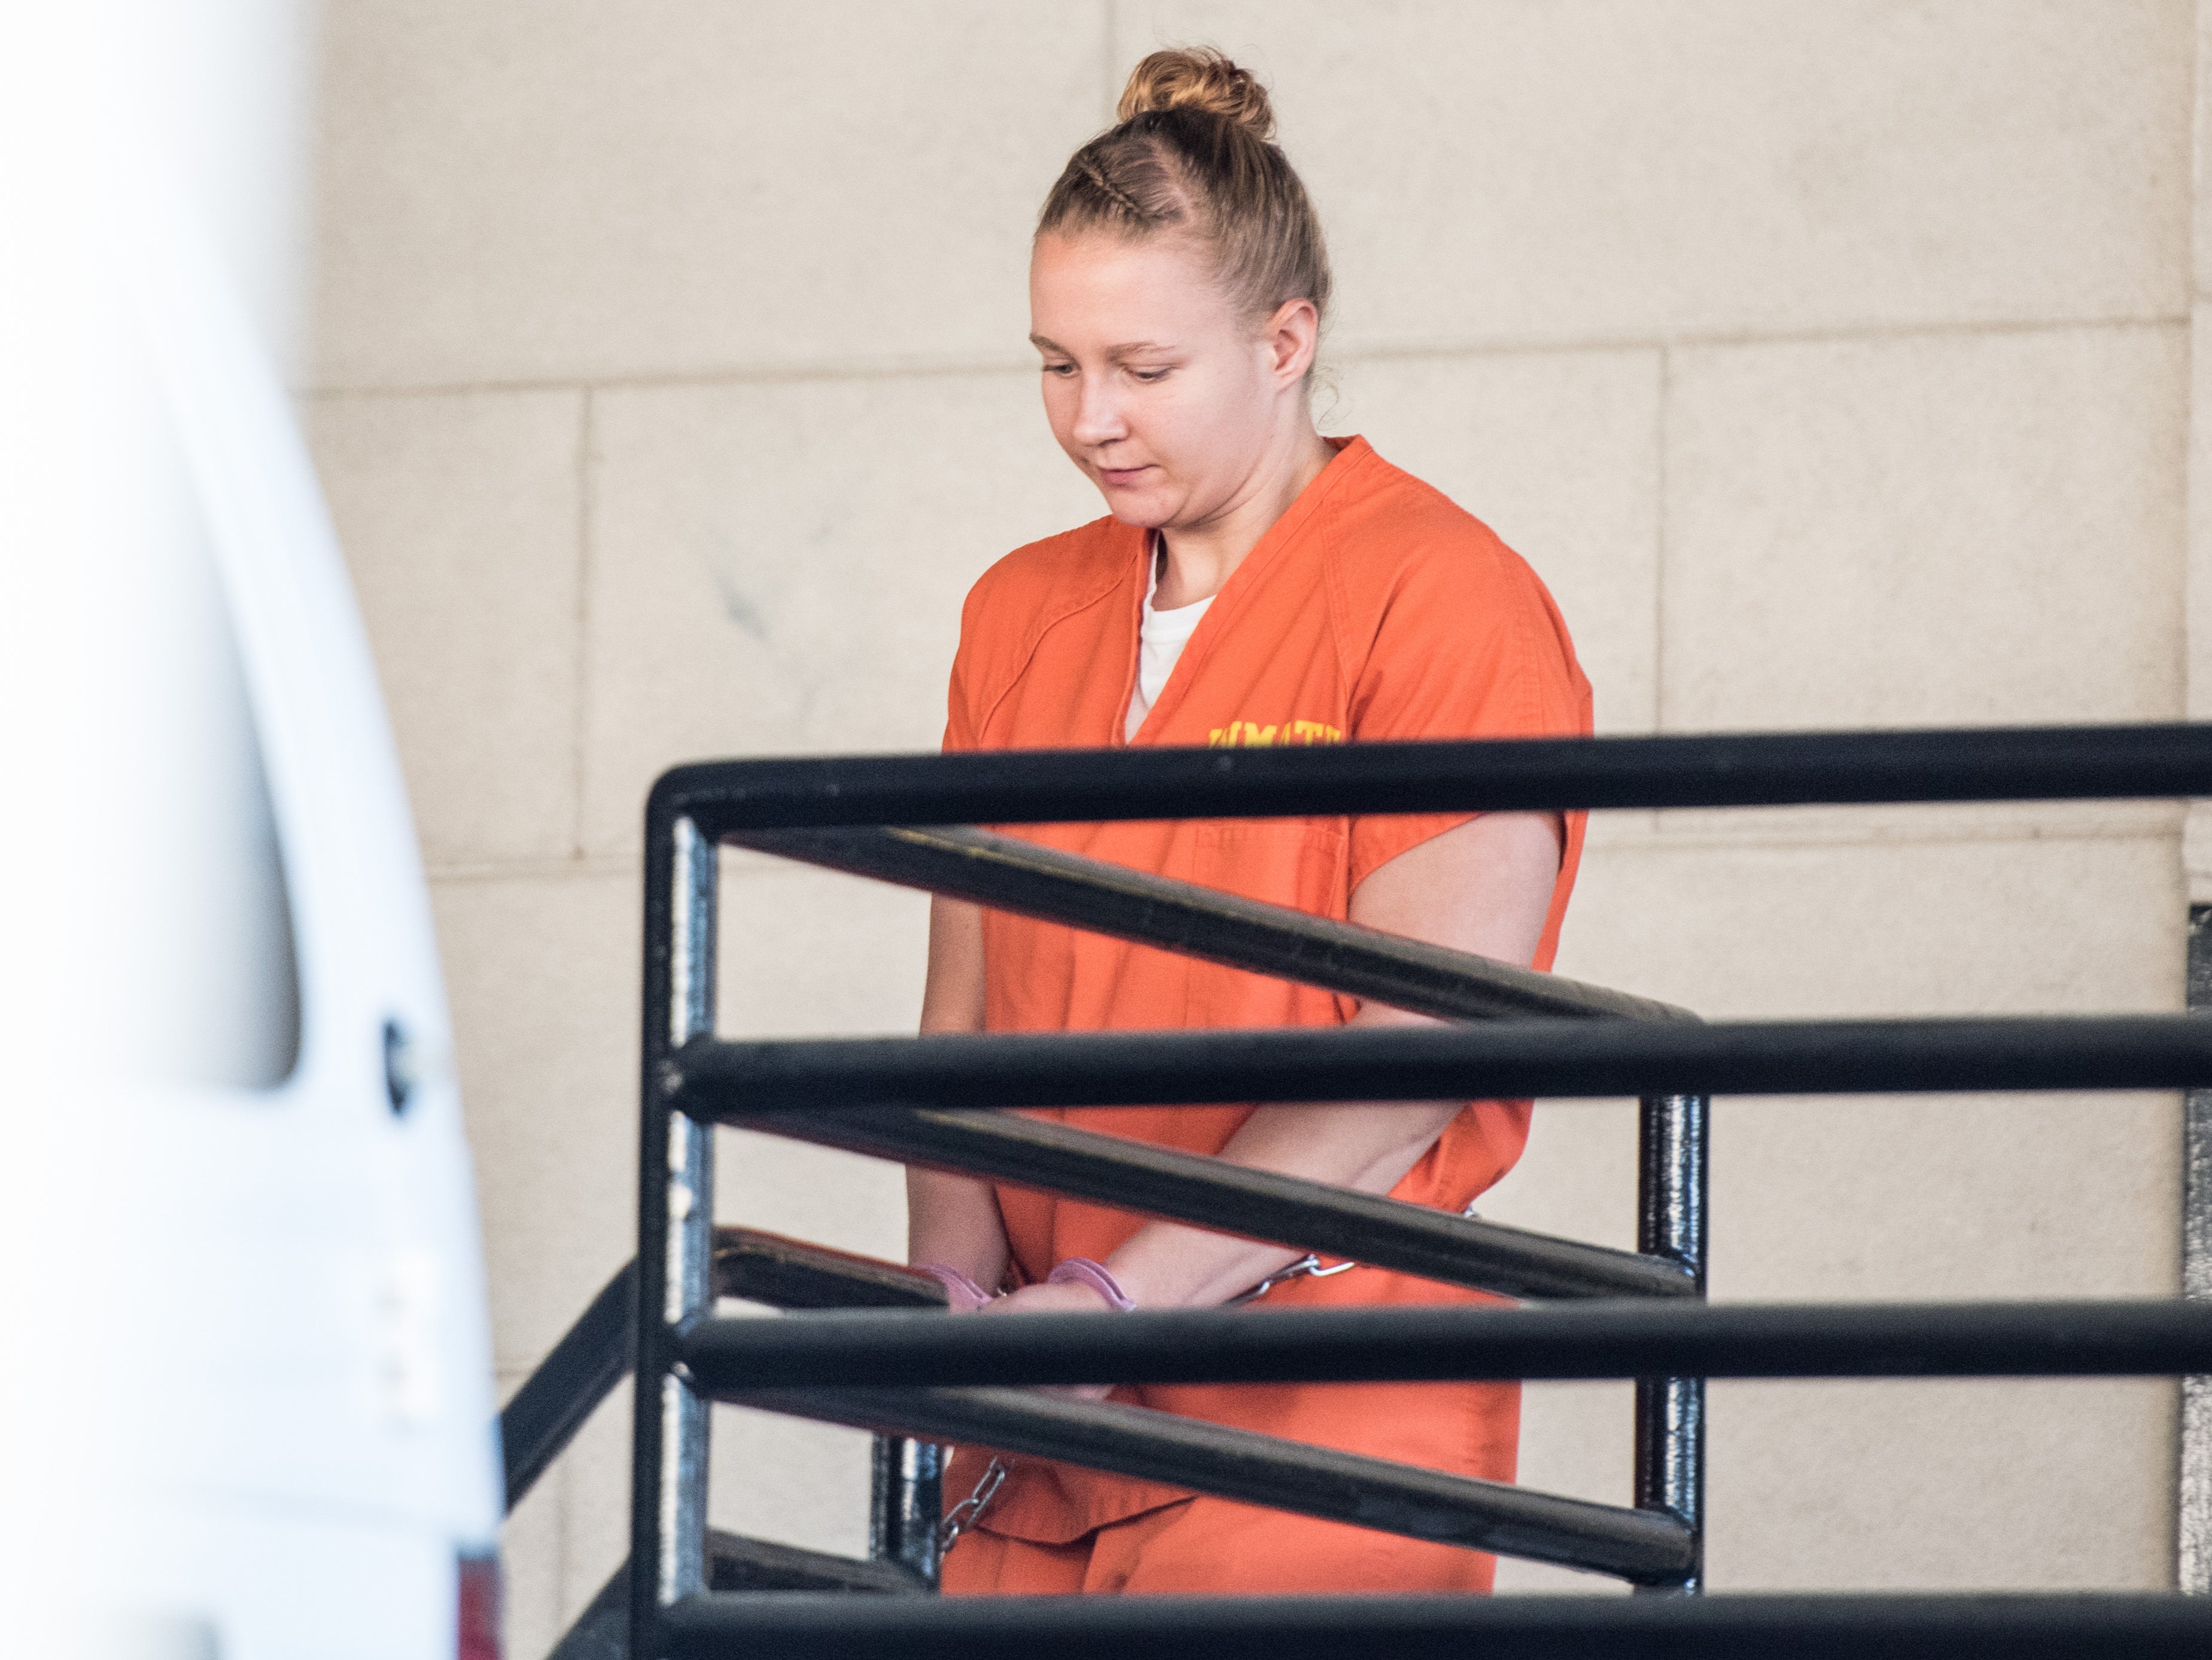 Reality Winner exits the Augusta Courthouse June 8, 2017 in Augusta, Georgia